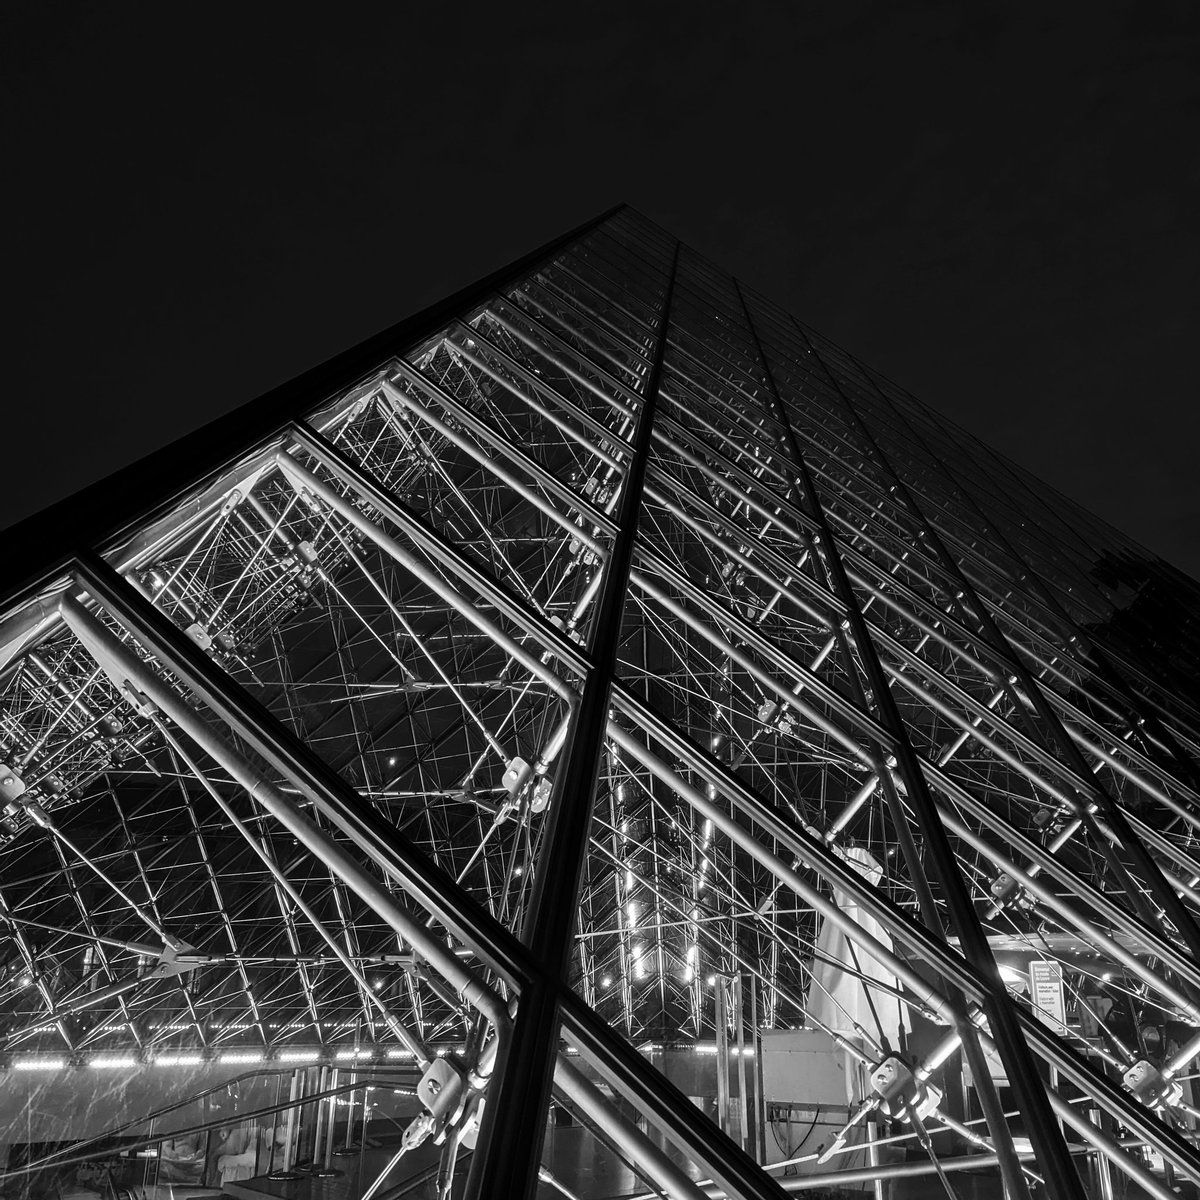 Pyramide @MuseeLouvre